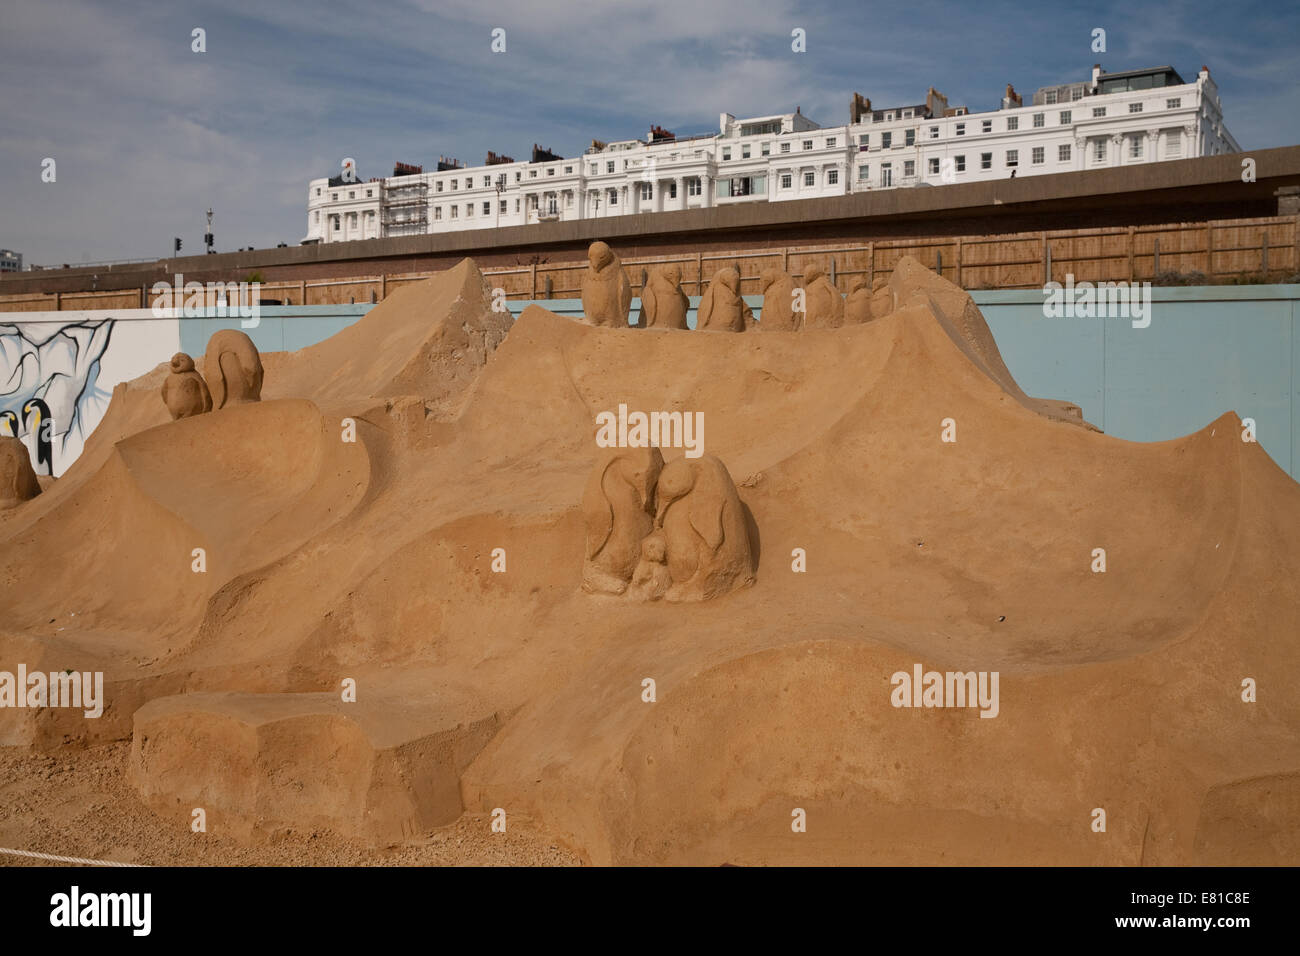 Penguins from the South Pole on display at the Sand Sculpture festival in Brighton Stock Photo